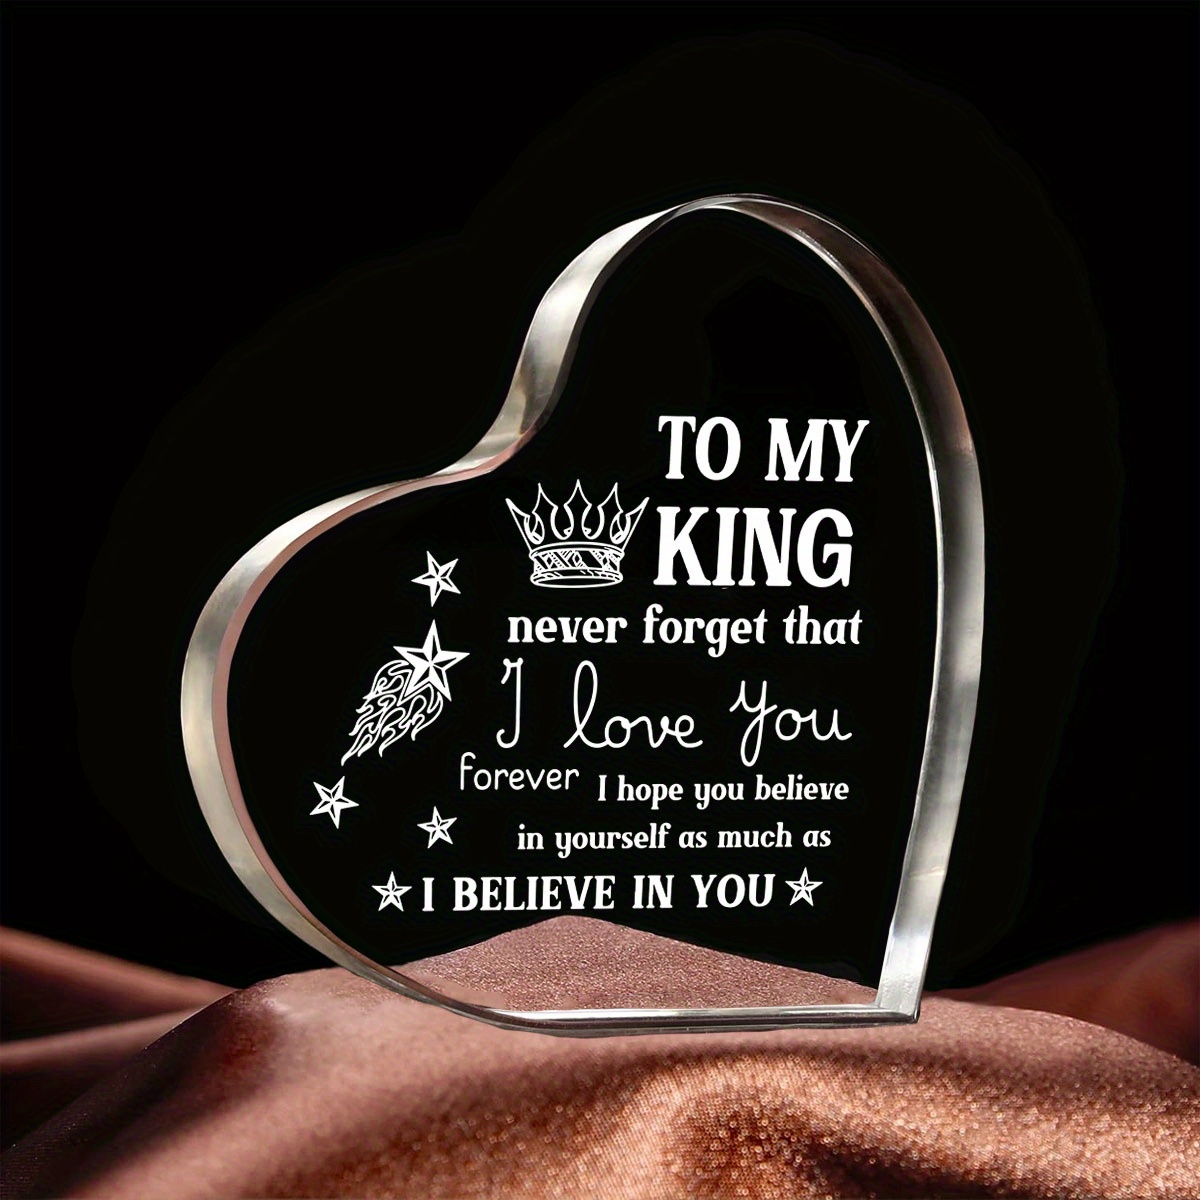 

Gifts For Boyfriend, Husband Gifts, Birthday Gifts For Boyfriend - I Love You Gifts For Him Anniversary Keepsake 3.9x3.9" - Romantic Valentines Day Gifts For Him Men Fiance